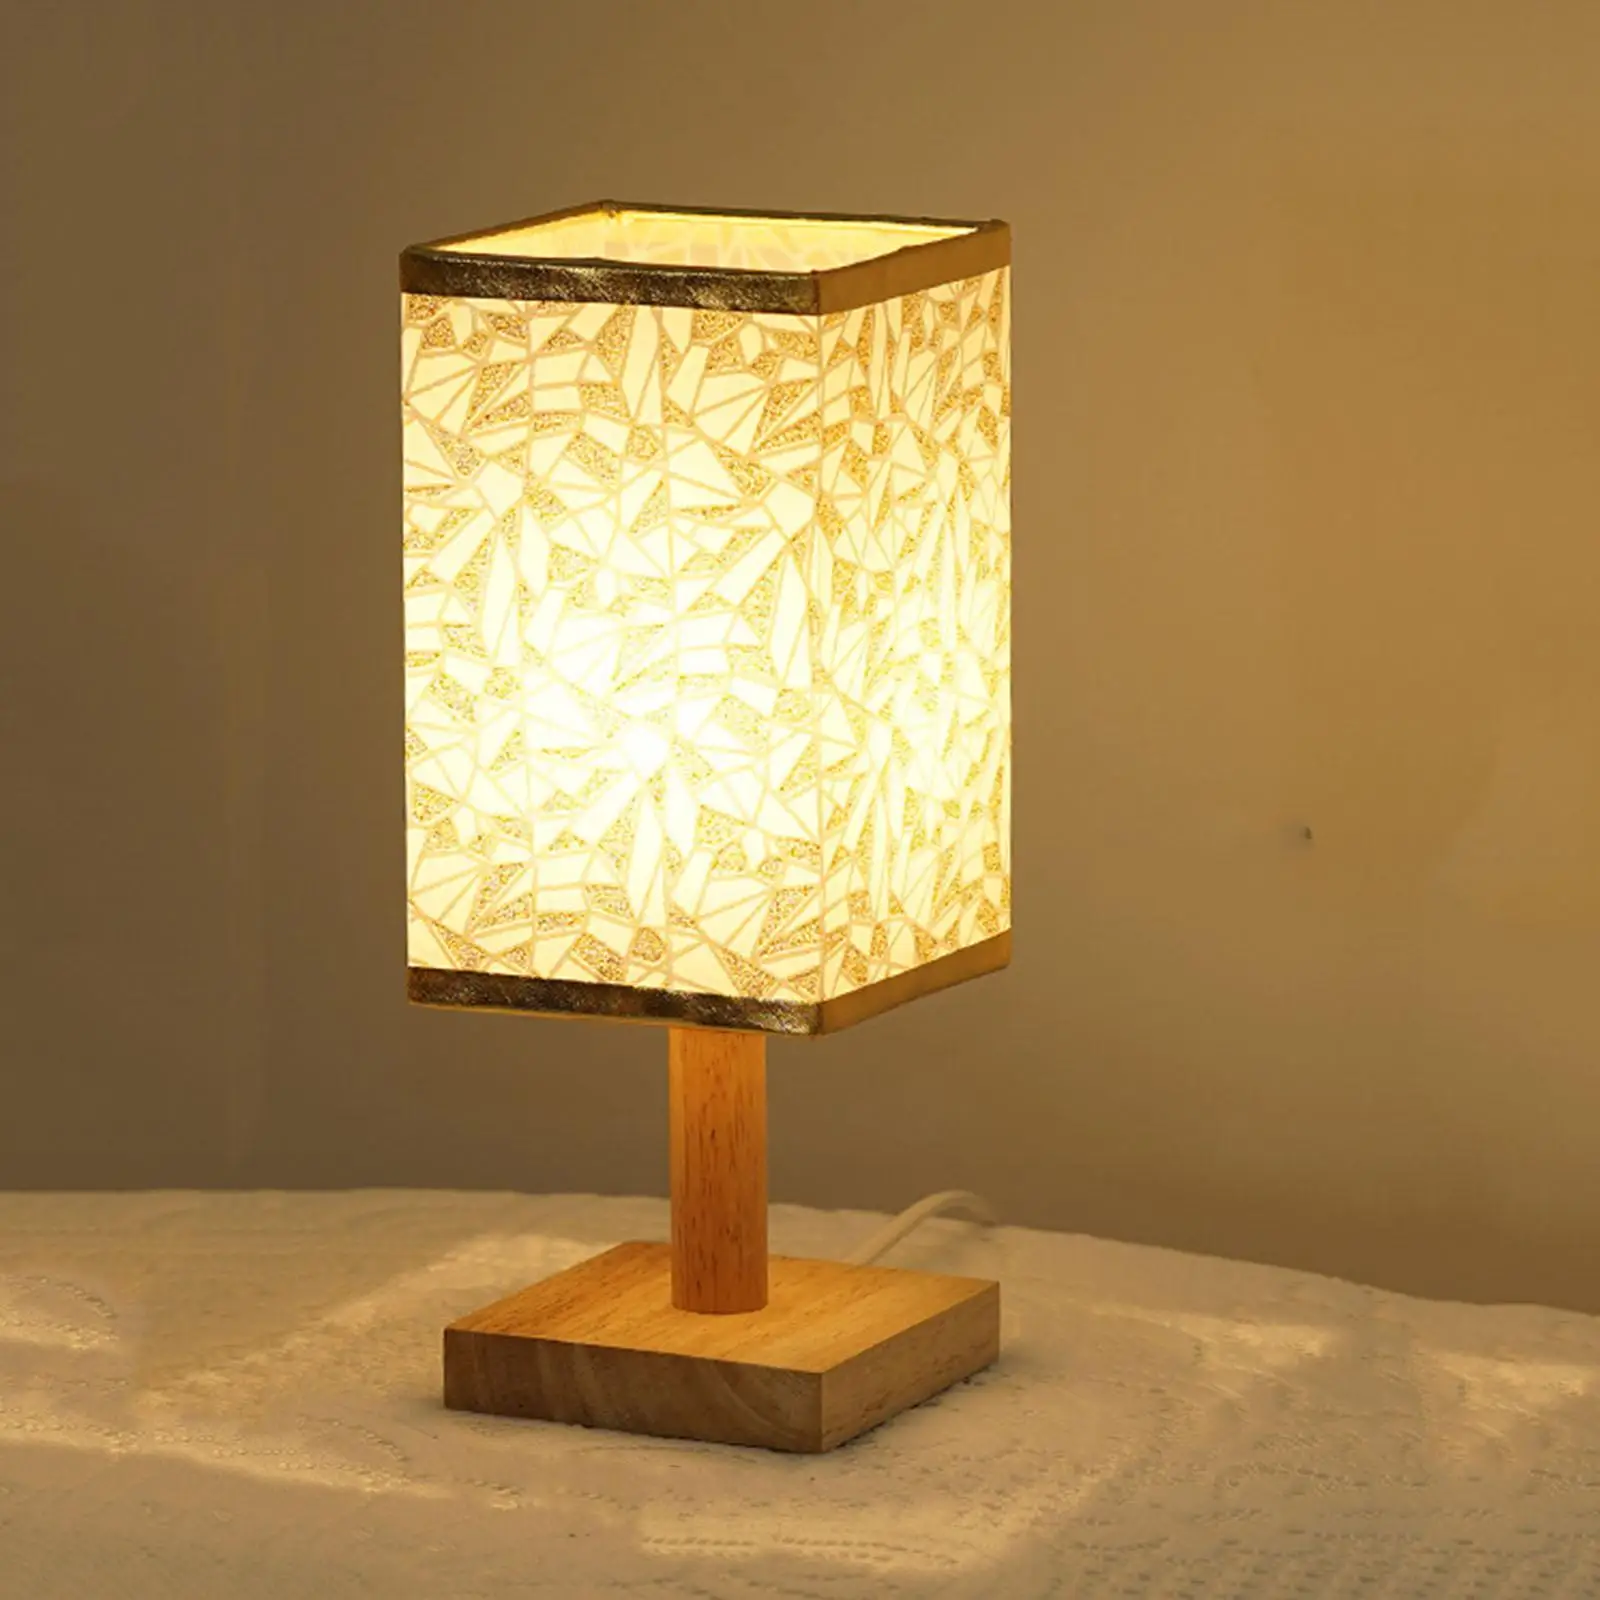 Modern Table Lamp, Nightstand Desk Lamp, Bedside Lamp with Wood Base And Linen